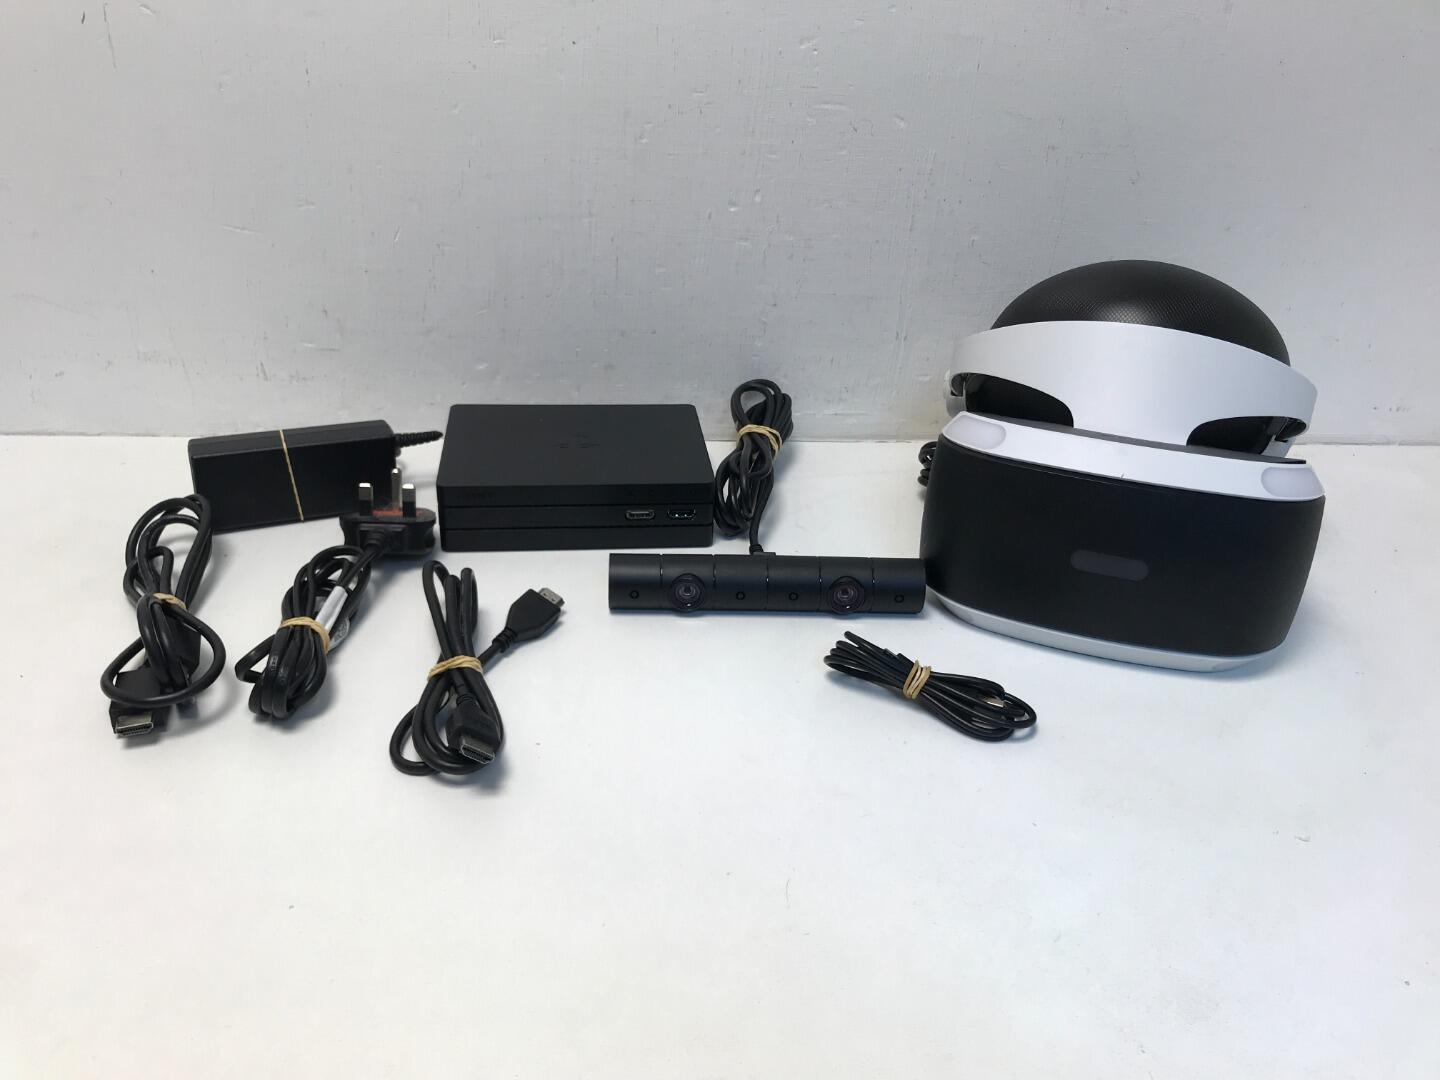 PlayStation (CUH-ZVR2) VR Starter Pack (PS4)